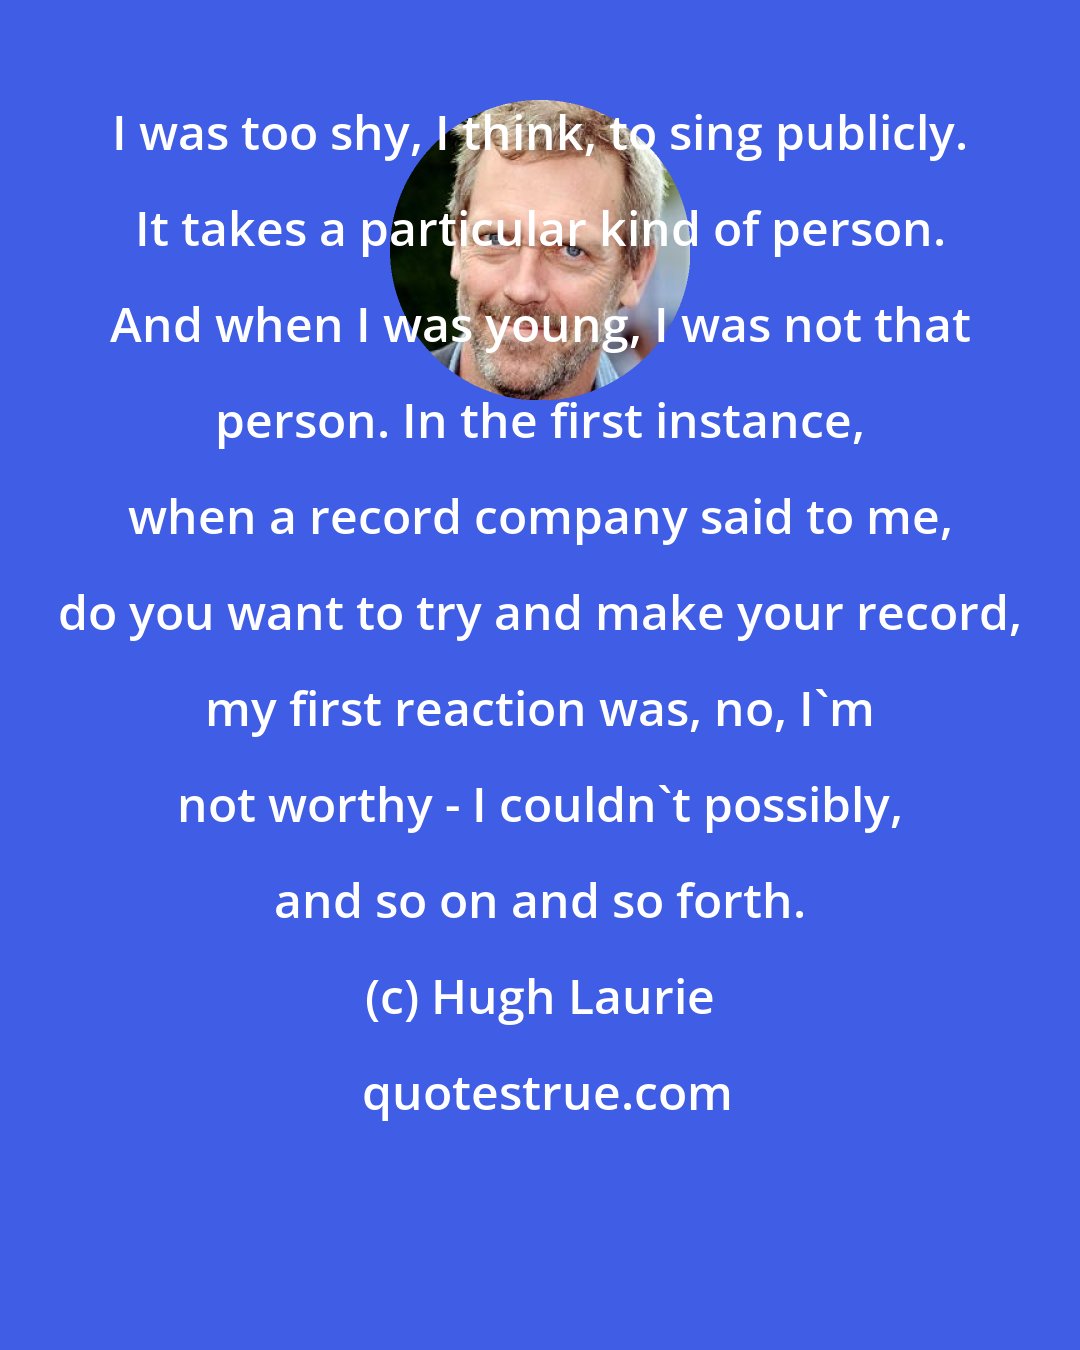 Hugh Laurie: I was too shy, I think, to sing publicly. It takes a particular kind of person. And when I was young, I was not that person. In the first instance, when a record company said to me, do you want to try and make your record, my first reaction was, no, I'm not worthy - I couldn't possibly, and so on and so forth.